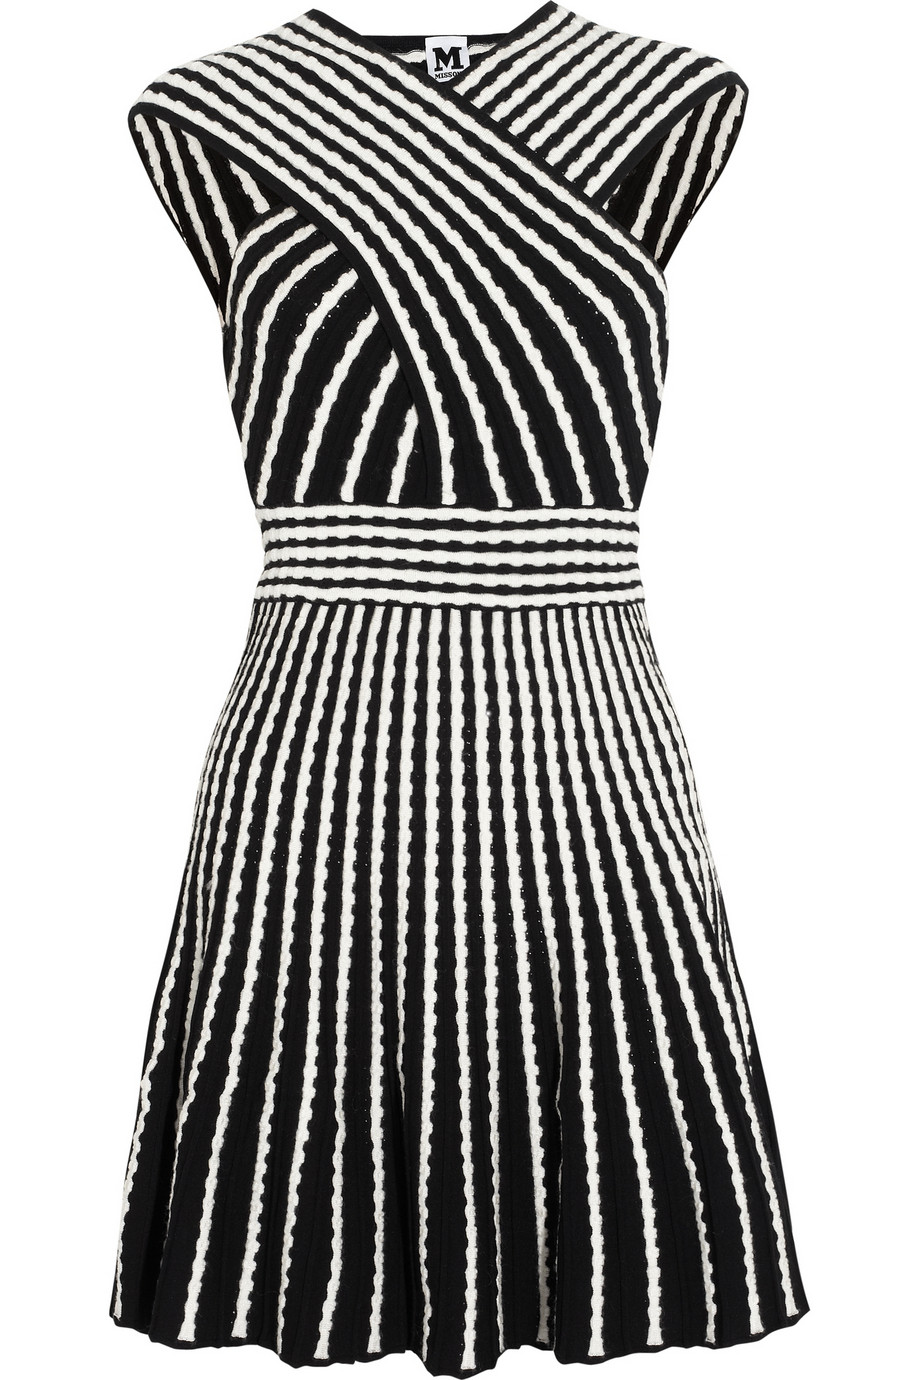 M Missoni Two Tone Knitted Dress in Black (White) - Lyst